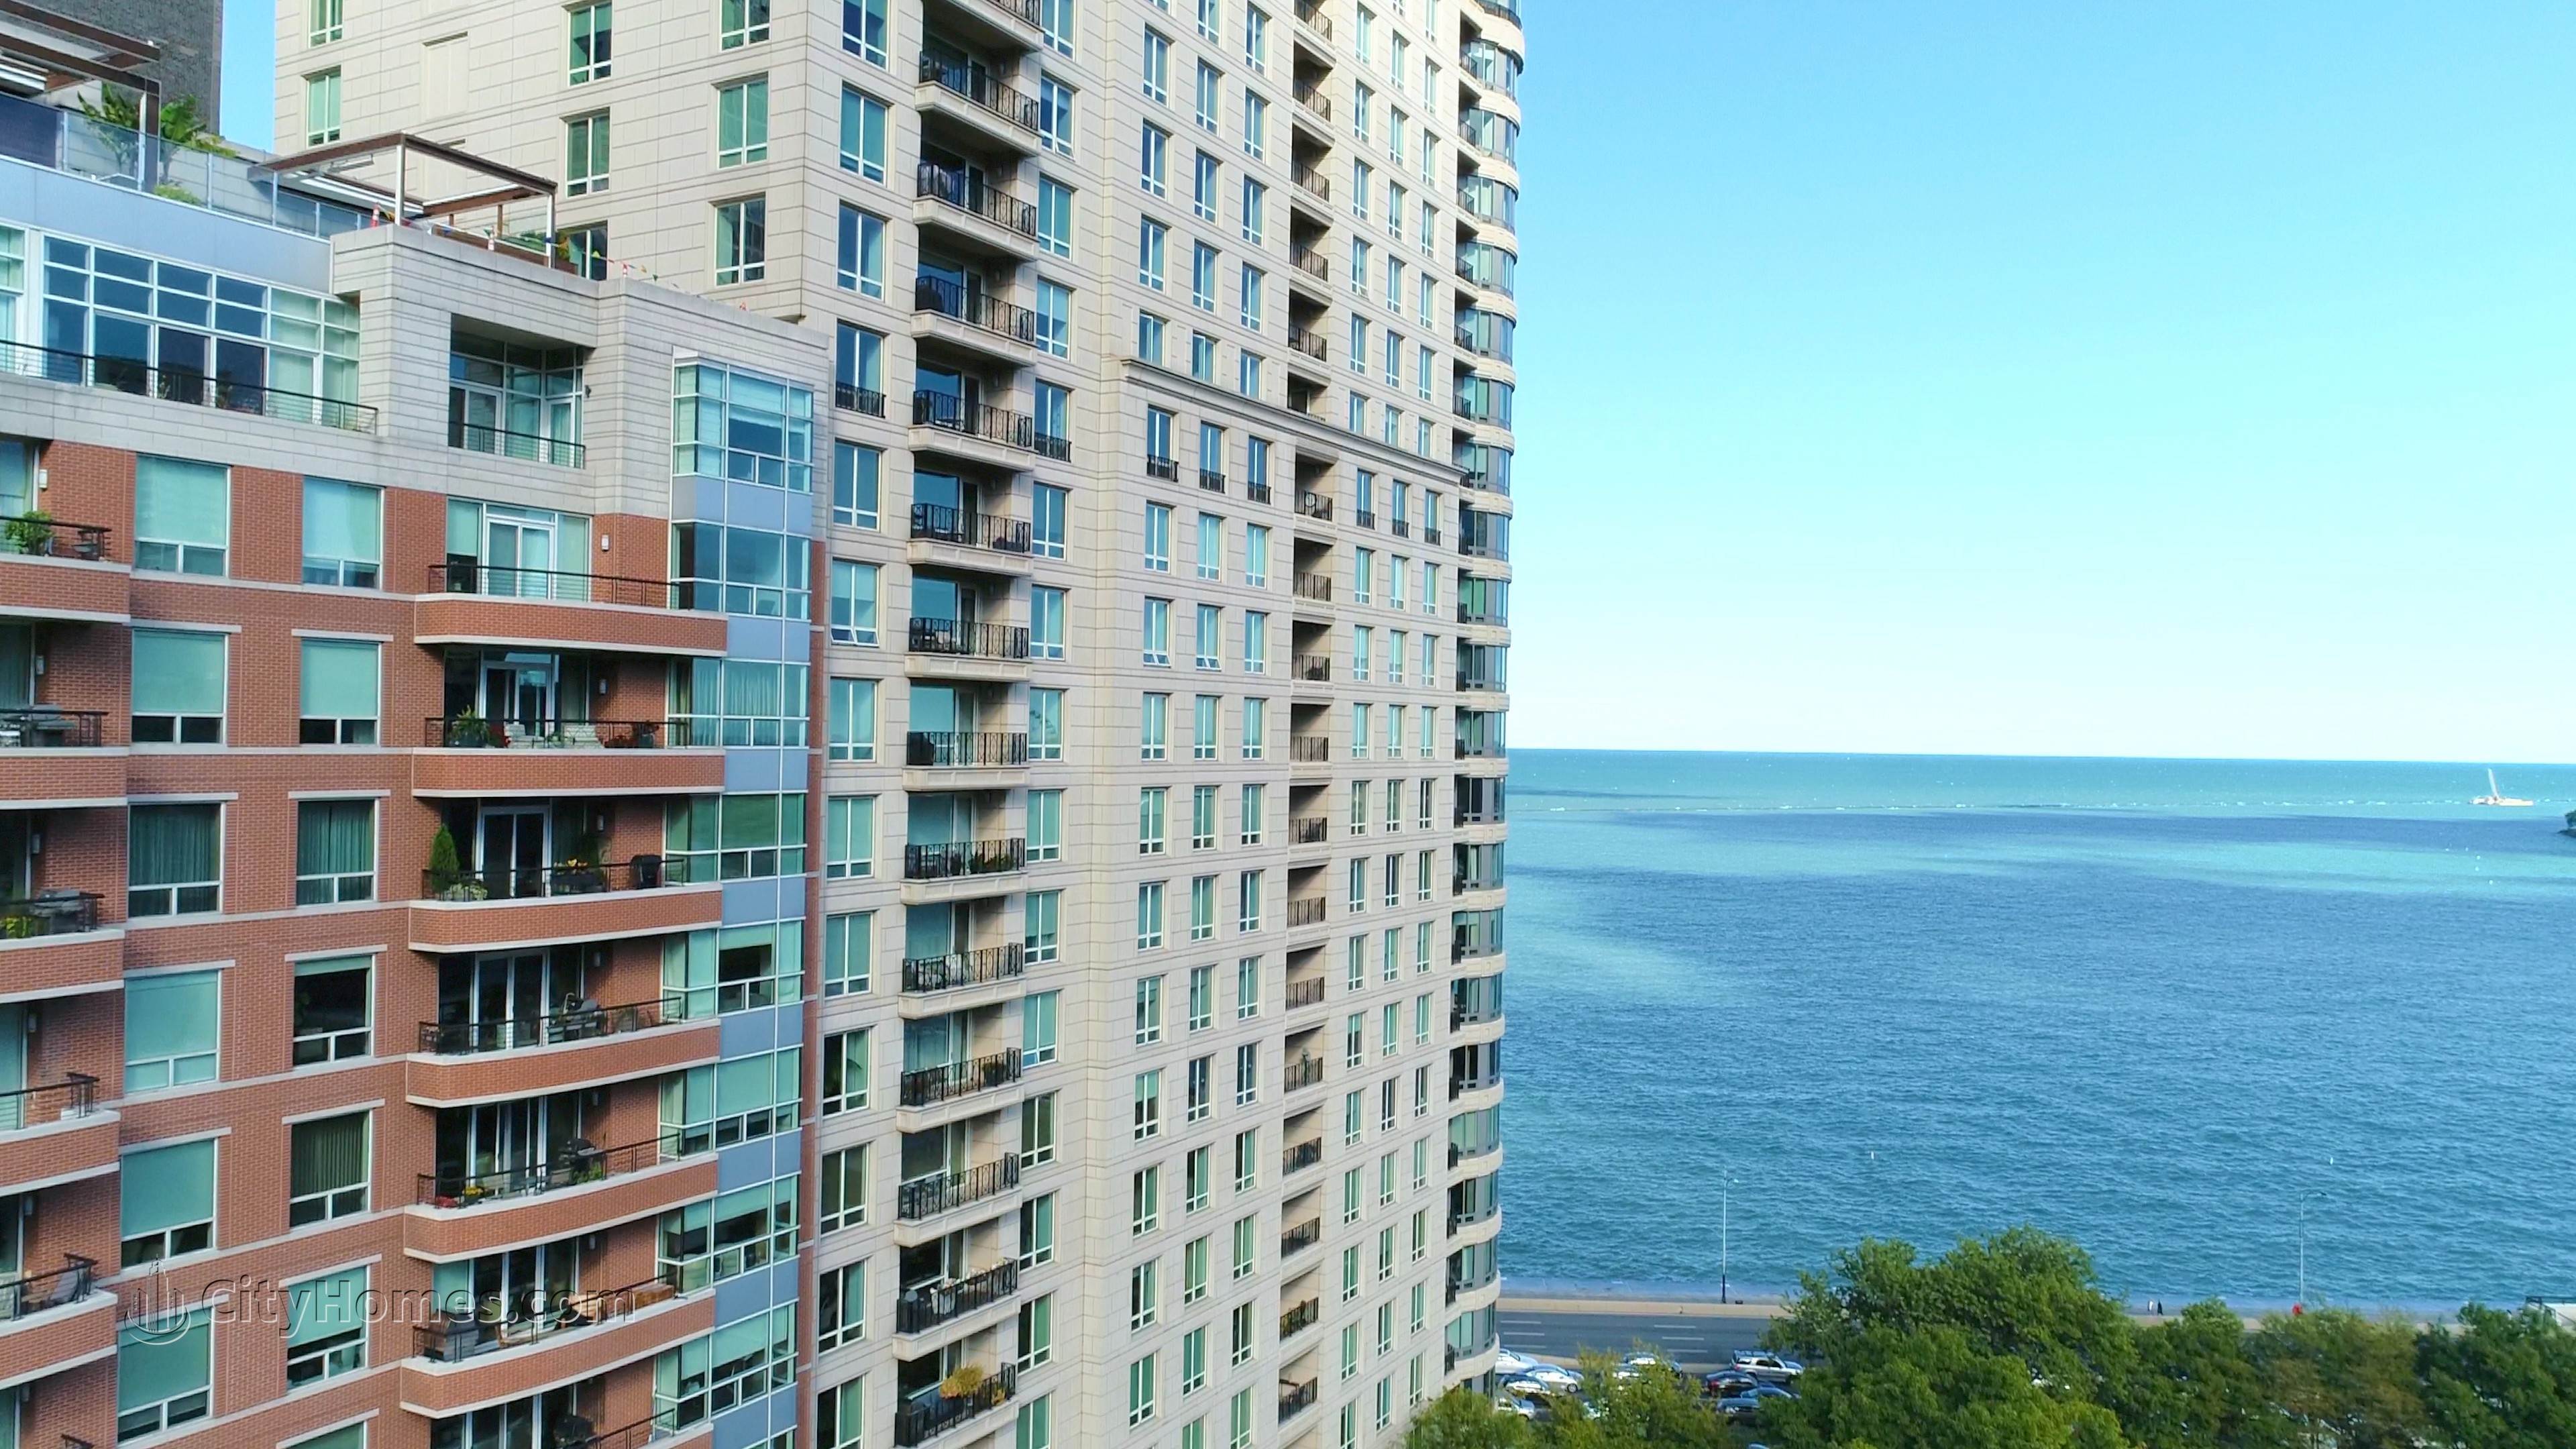 Residences of Lakeshore Park xây dựng tại 840 N Lake Shore Dr, Central Chicago, Chicago, IL 60611